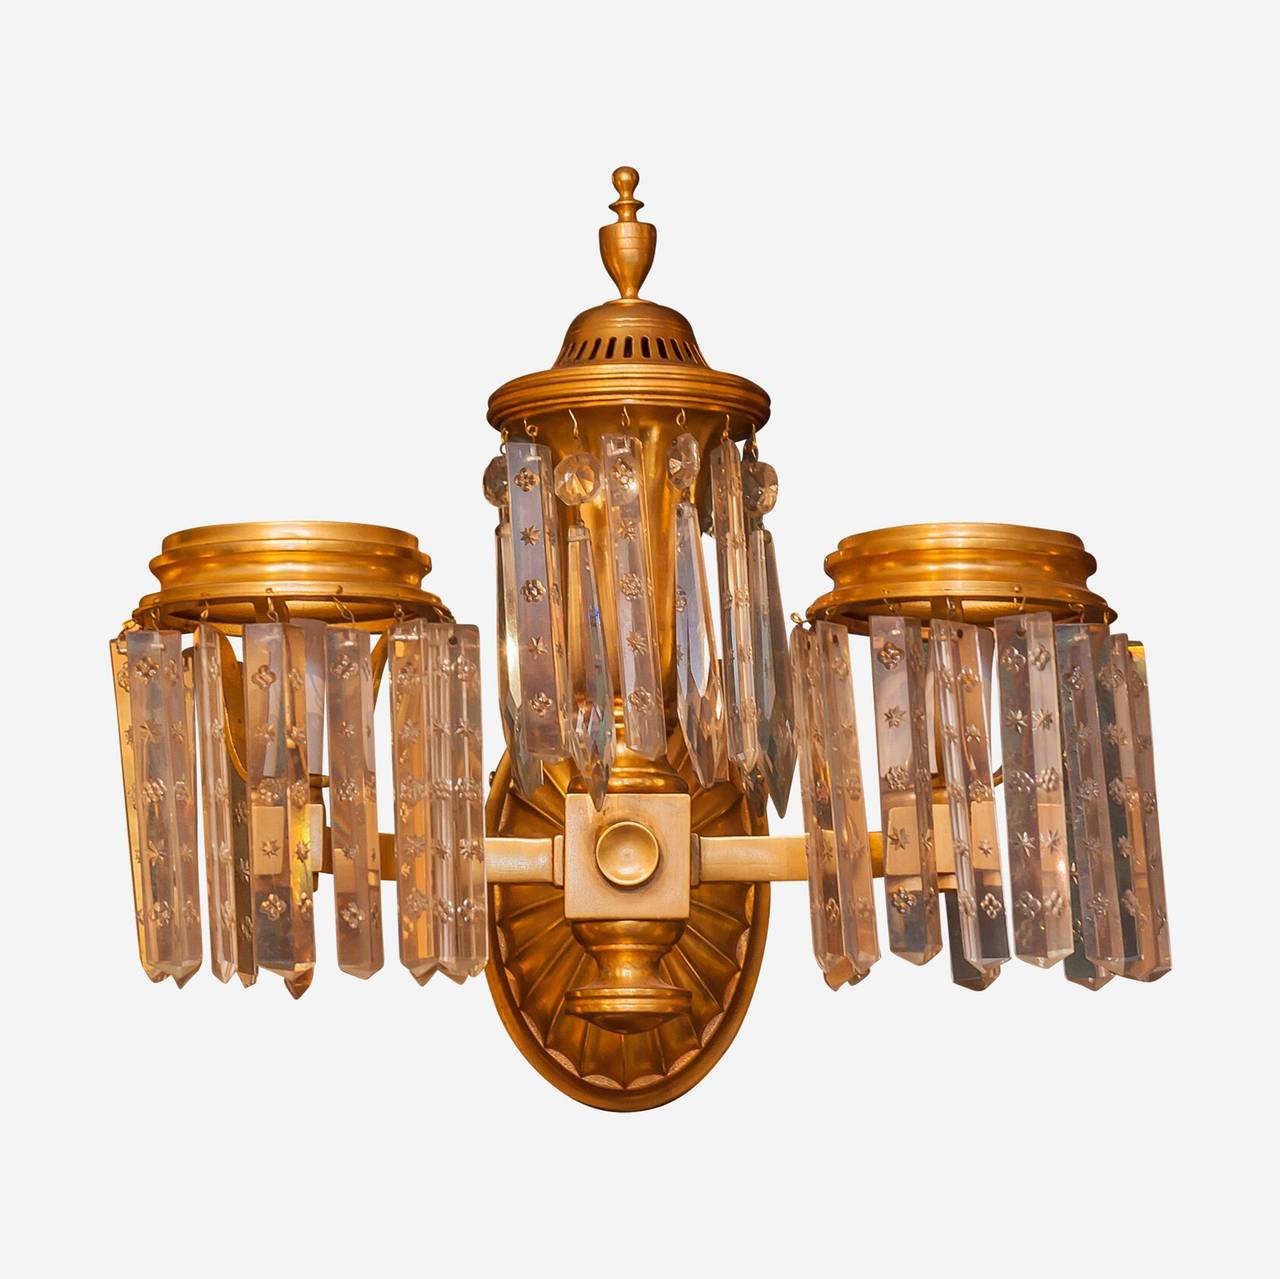 Set of Four Regency Style Gilt Bronze and Crystal Wall Light Sconces with Floral Patterned Glass Pendants
Stock Number: L227